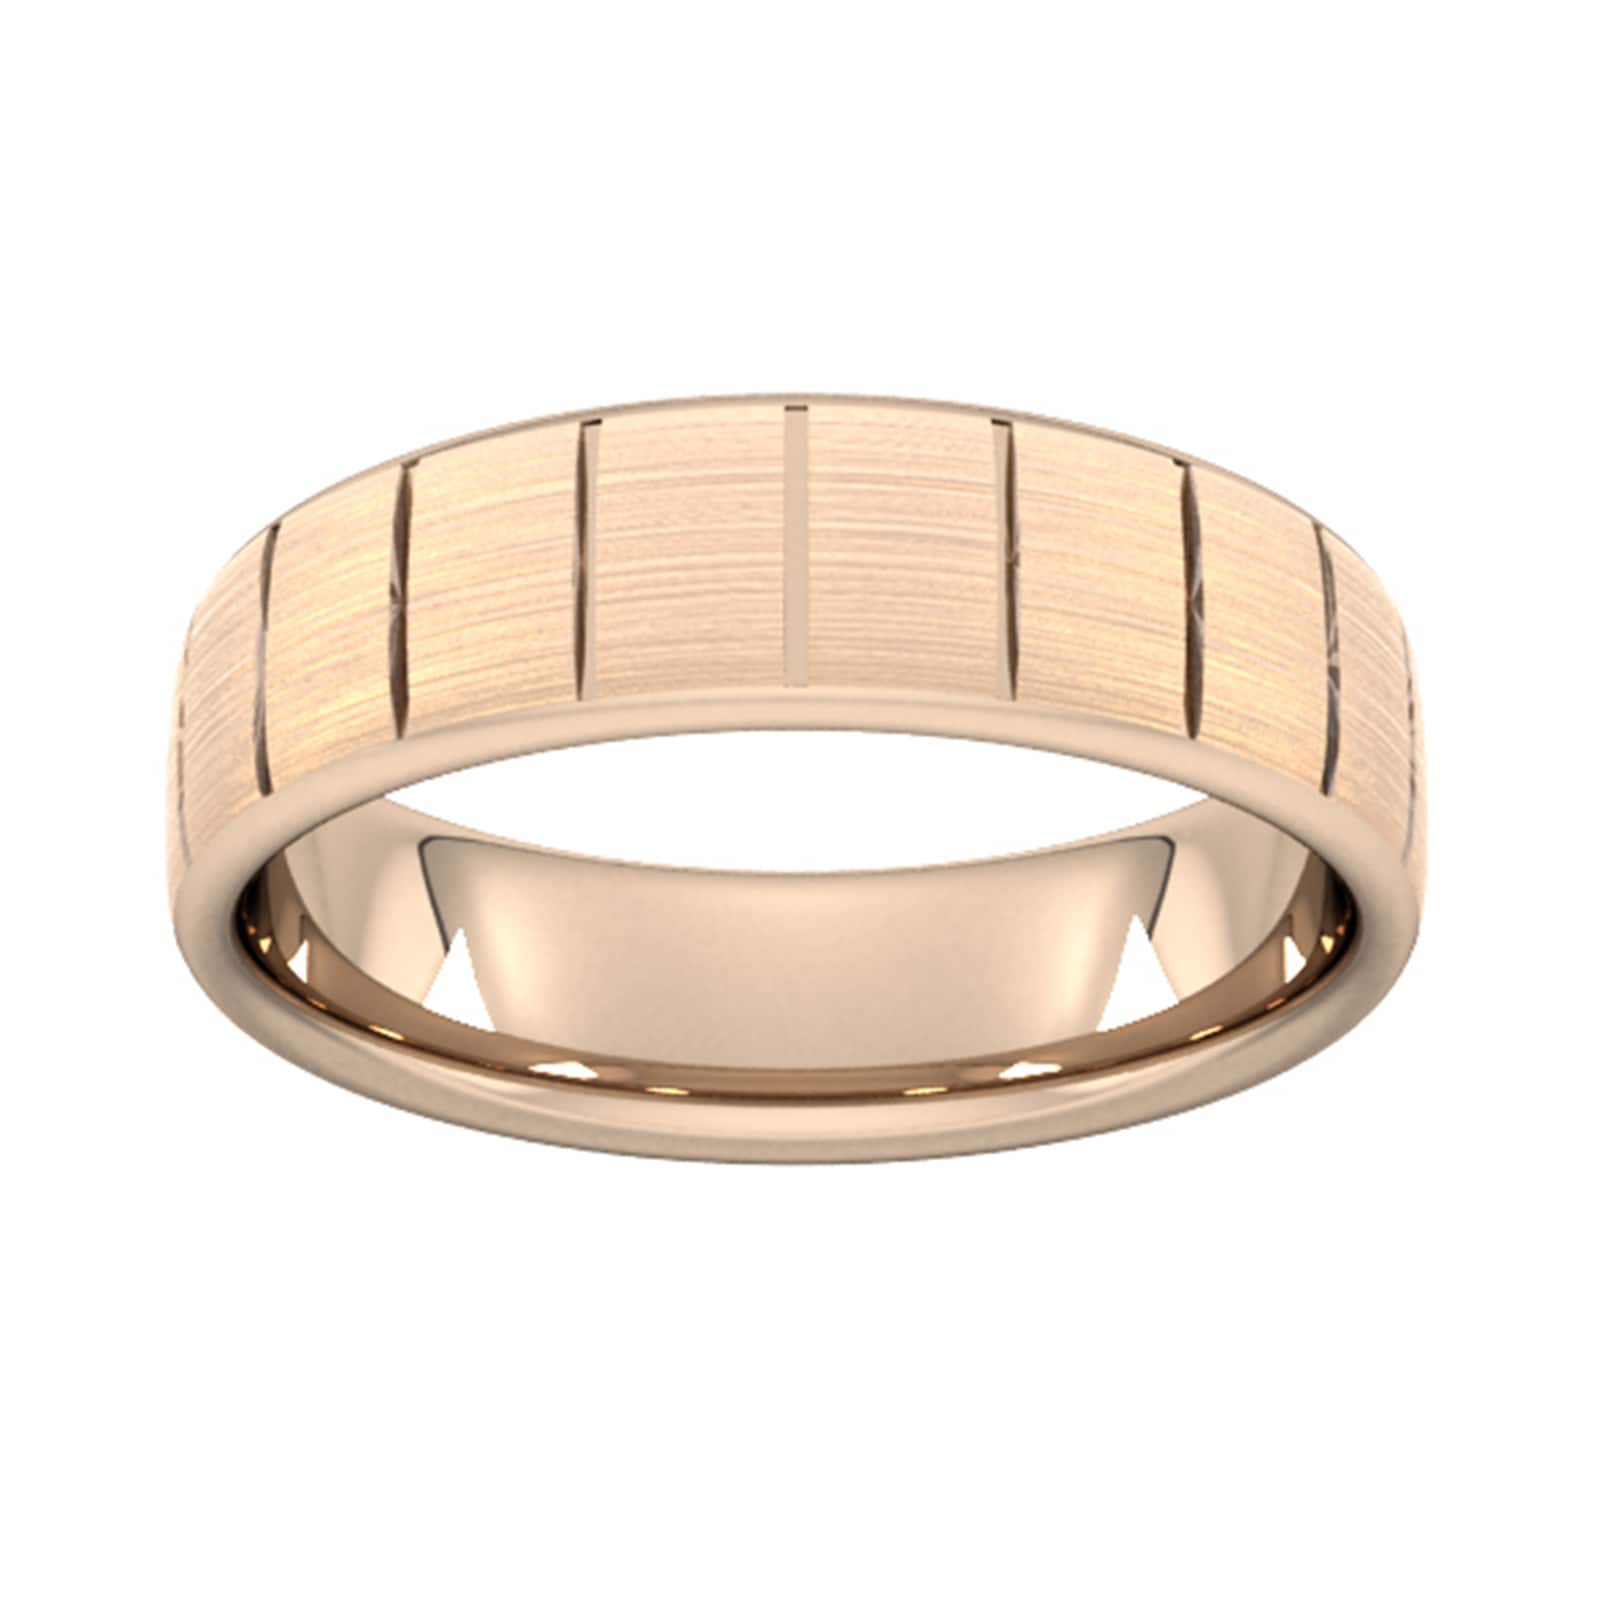 6mm Slight Court Heavy Vertical Lines Wedding Ring In 18 Carat Rose Gold - Ring Size O